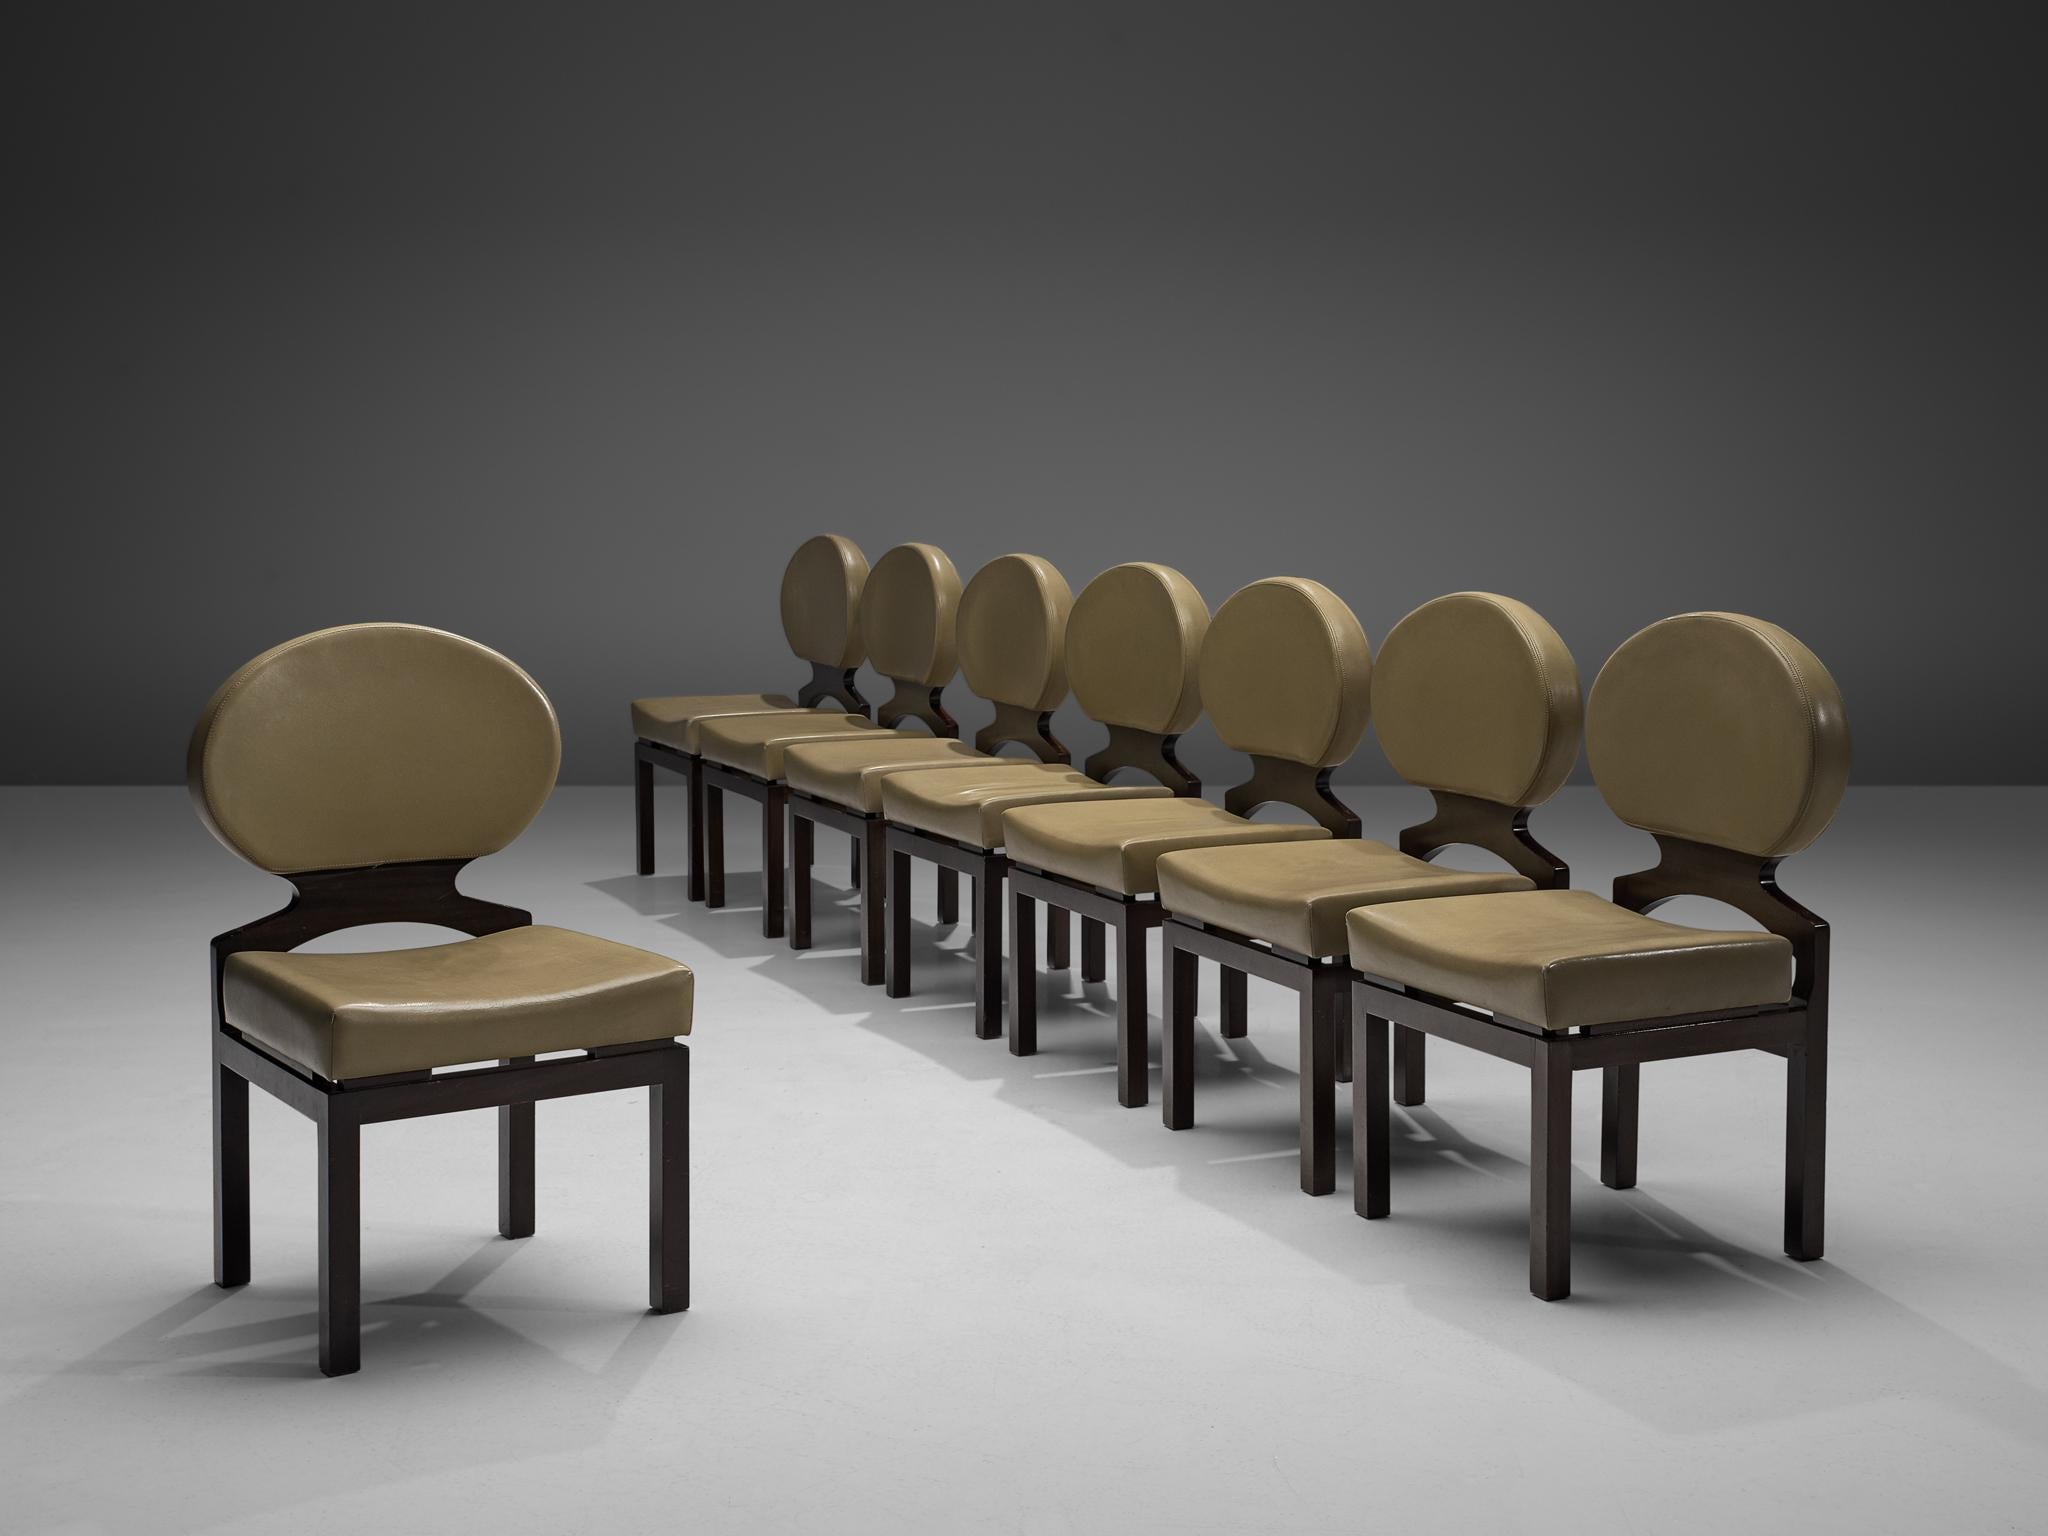 Emiel Veranneman, set of eight 'Osaka Chairs', wood and leather, Belgium 1970.

The Osaka dining chair was designed by Emiel Veranneman for the Belgian pavilion at the Wold Exhibition 1970 in Osaka, Japan. With their round backrests these chairs